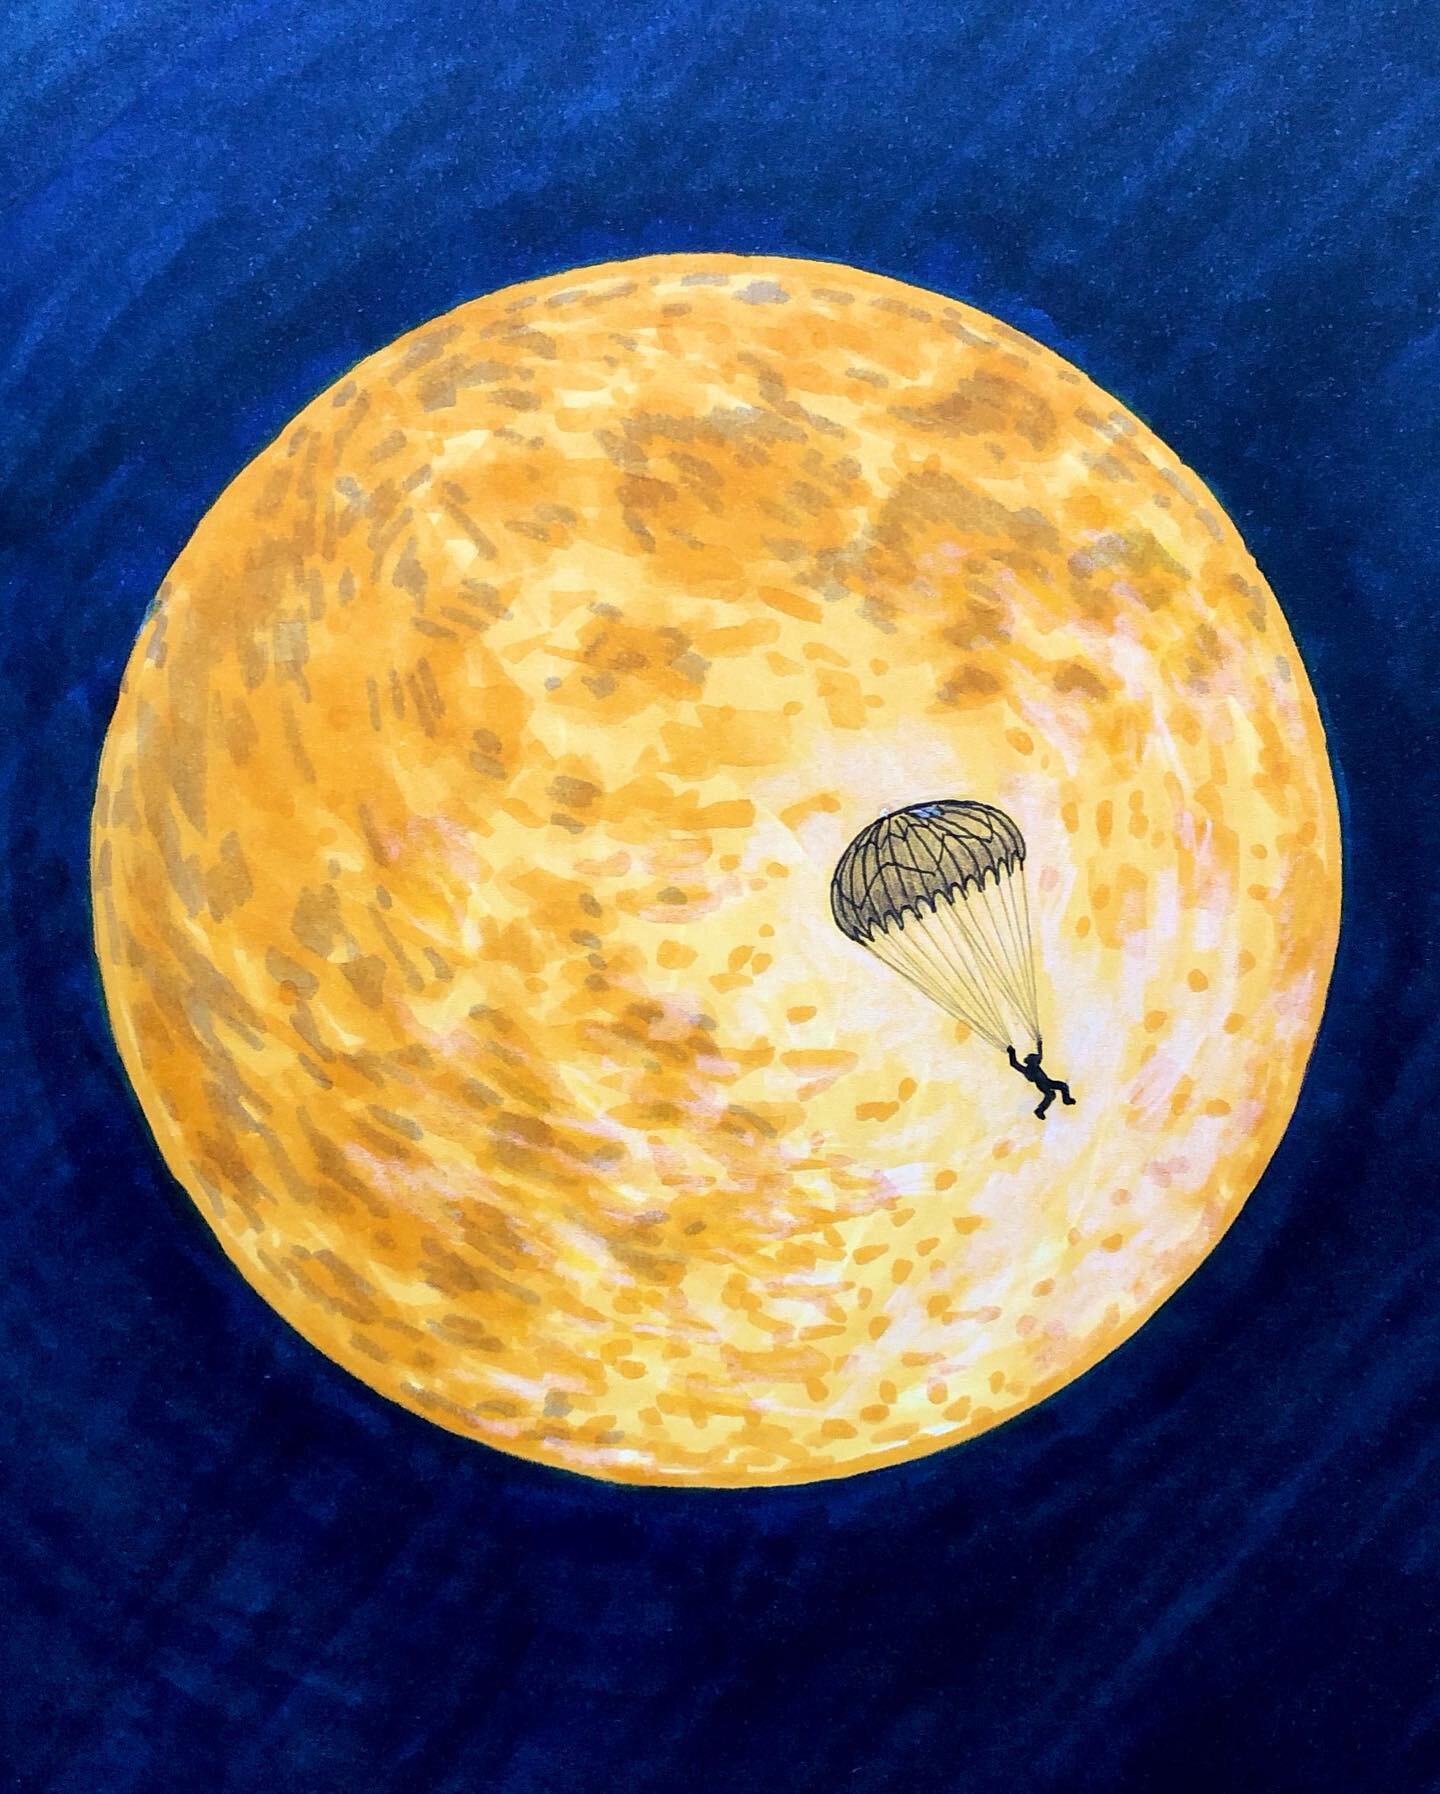 Can anybody fly this thing
@coldplay
Shoutout to @joanna_the_running_chef and @emilyjean_machine &hellip; I added the other two versions because you were fans 😉
#musicart #parachutes #artoftheday #emotions